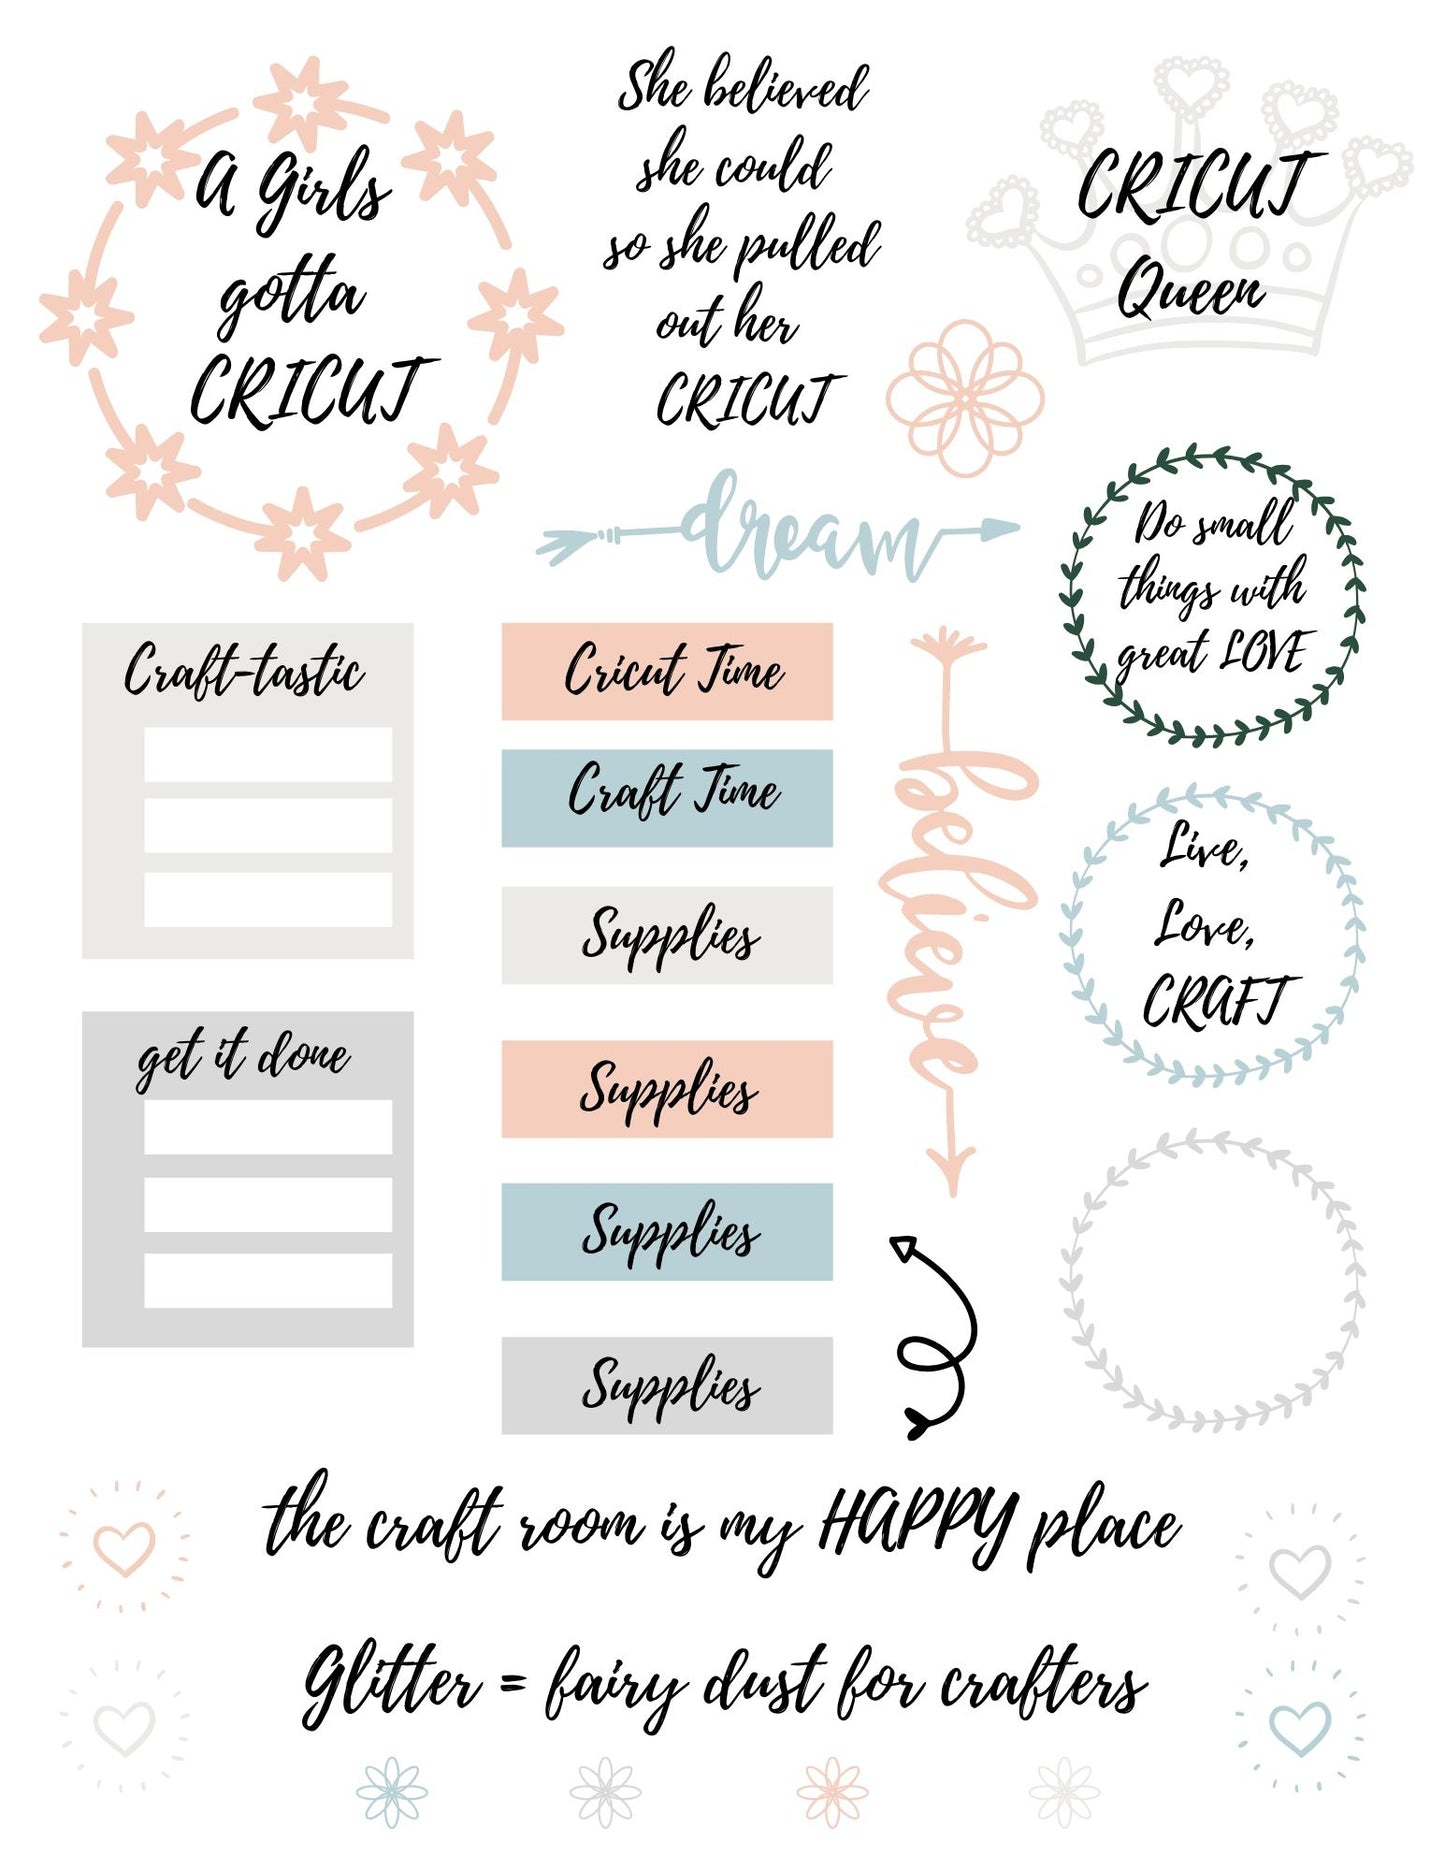 Printable Cricut Project Cards with Bonus Cricut themed Print and Cut stickers